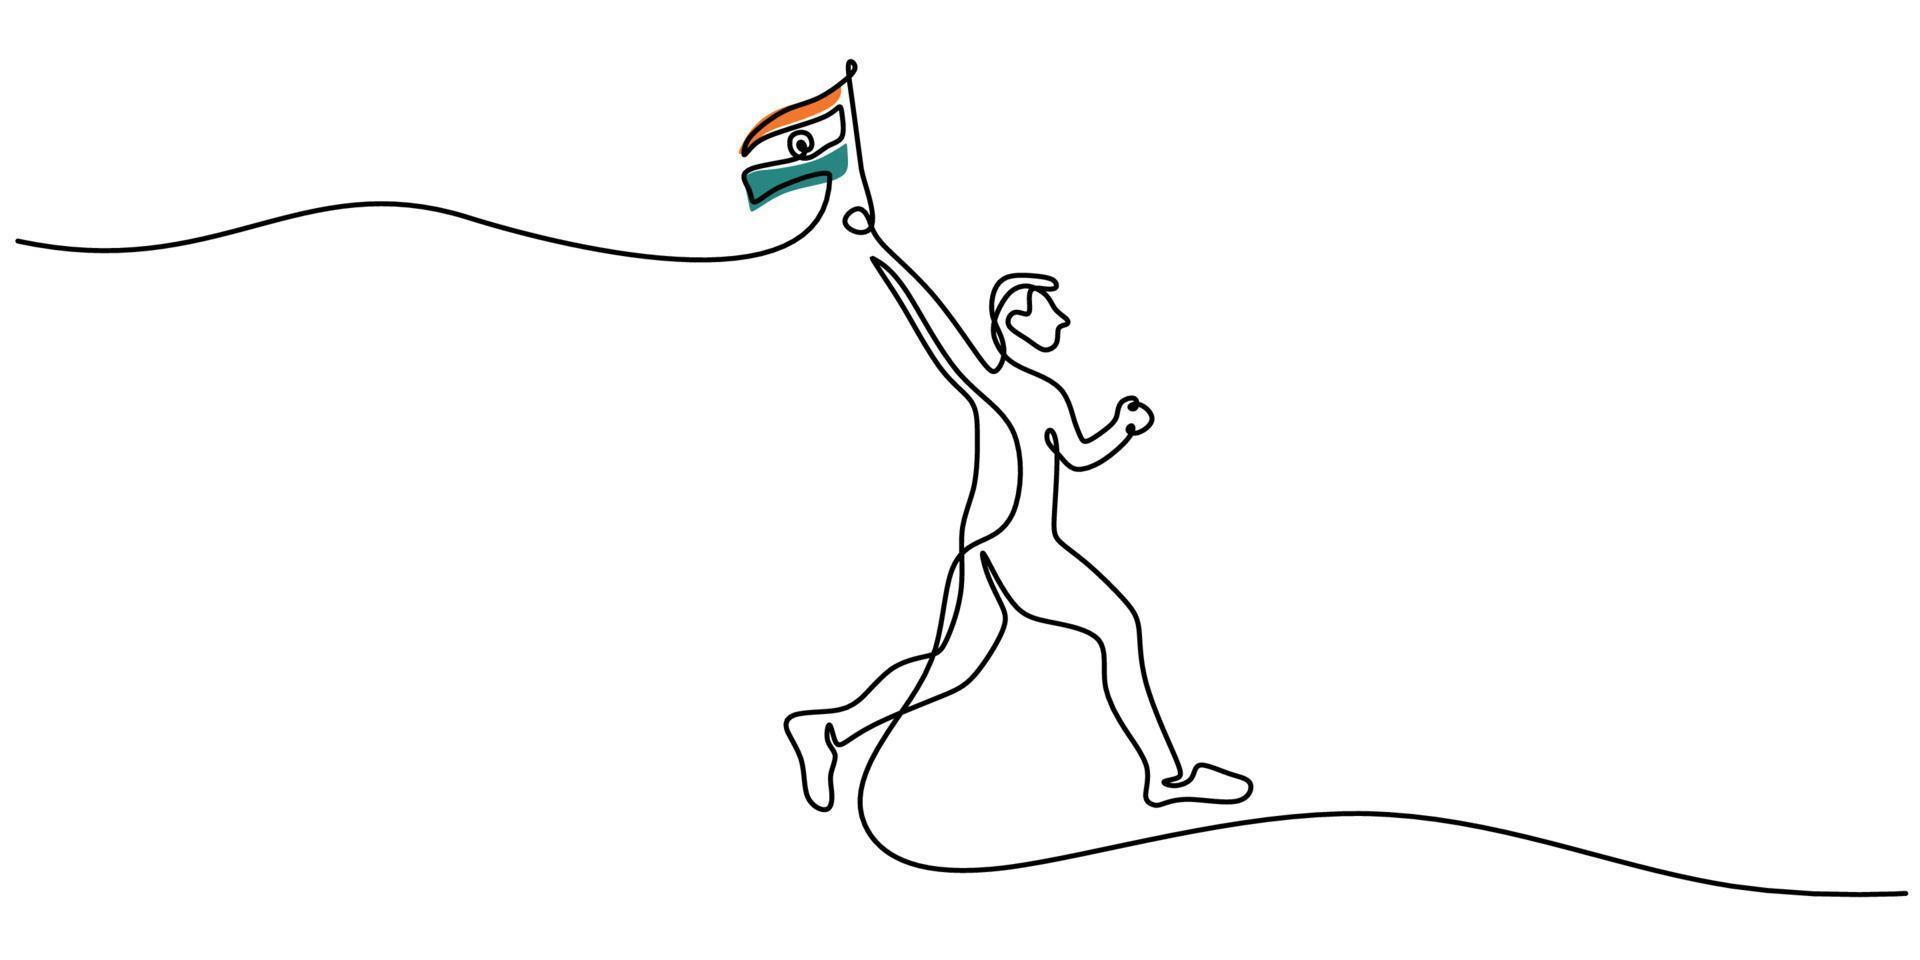 Continuous line india running man holding india flag for republic day vector